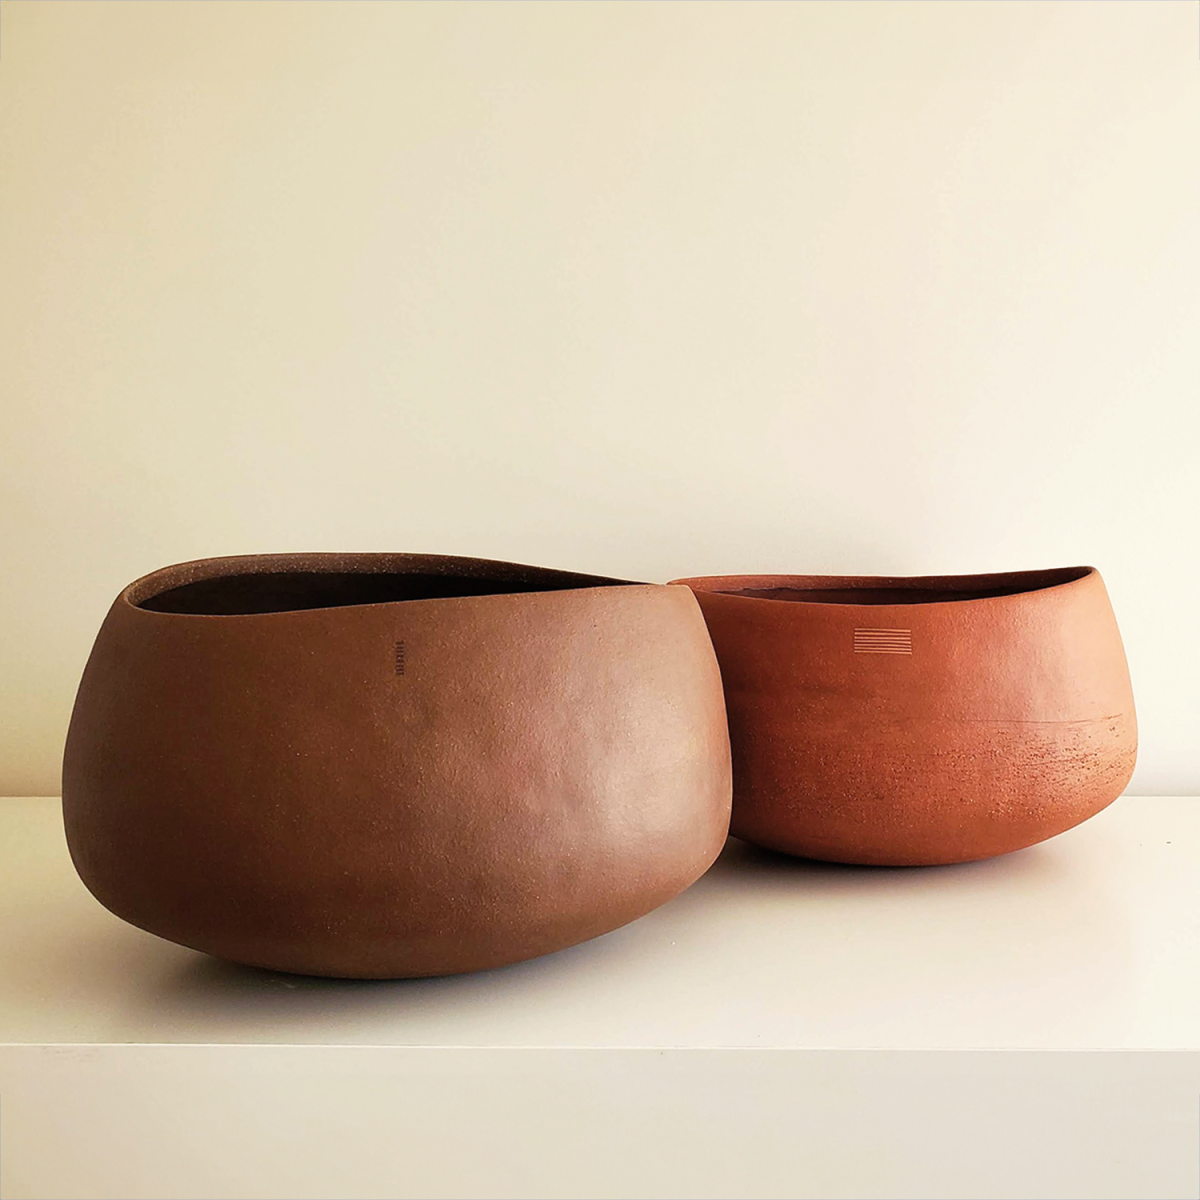 The coil-built bowls of hope/memory, 2023, were created with collaborators, 12 x 18 in.